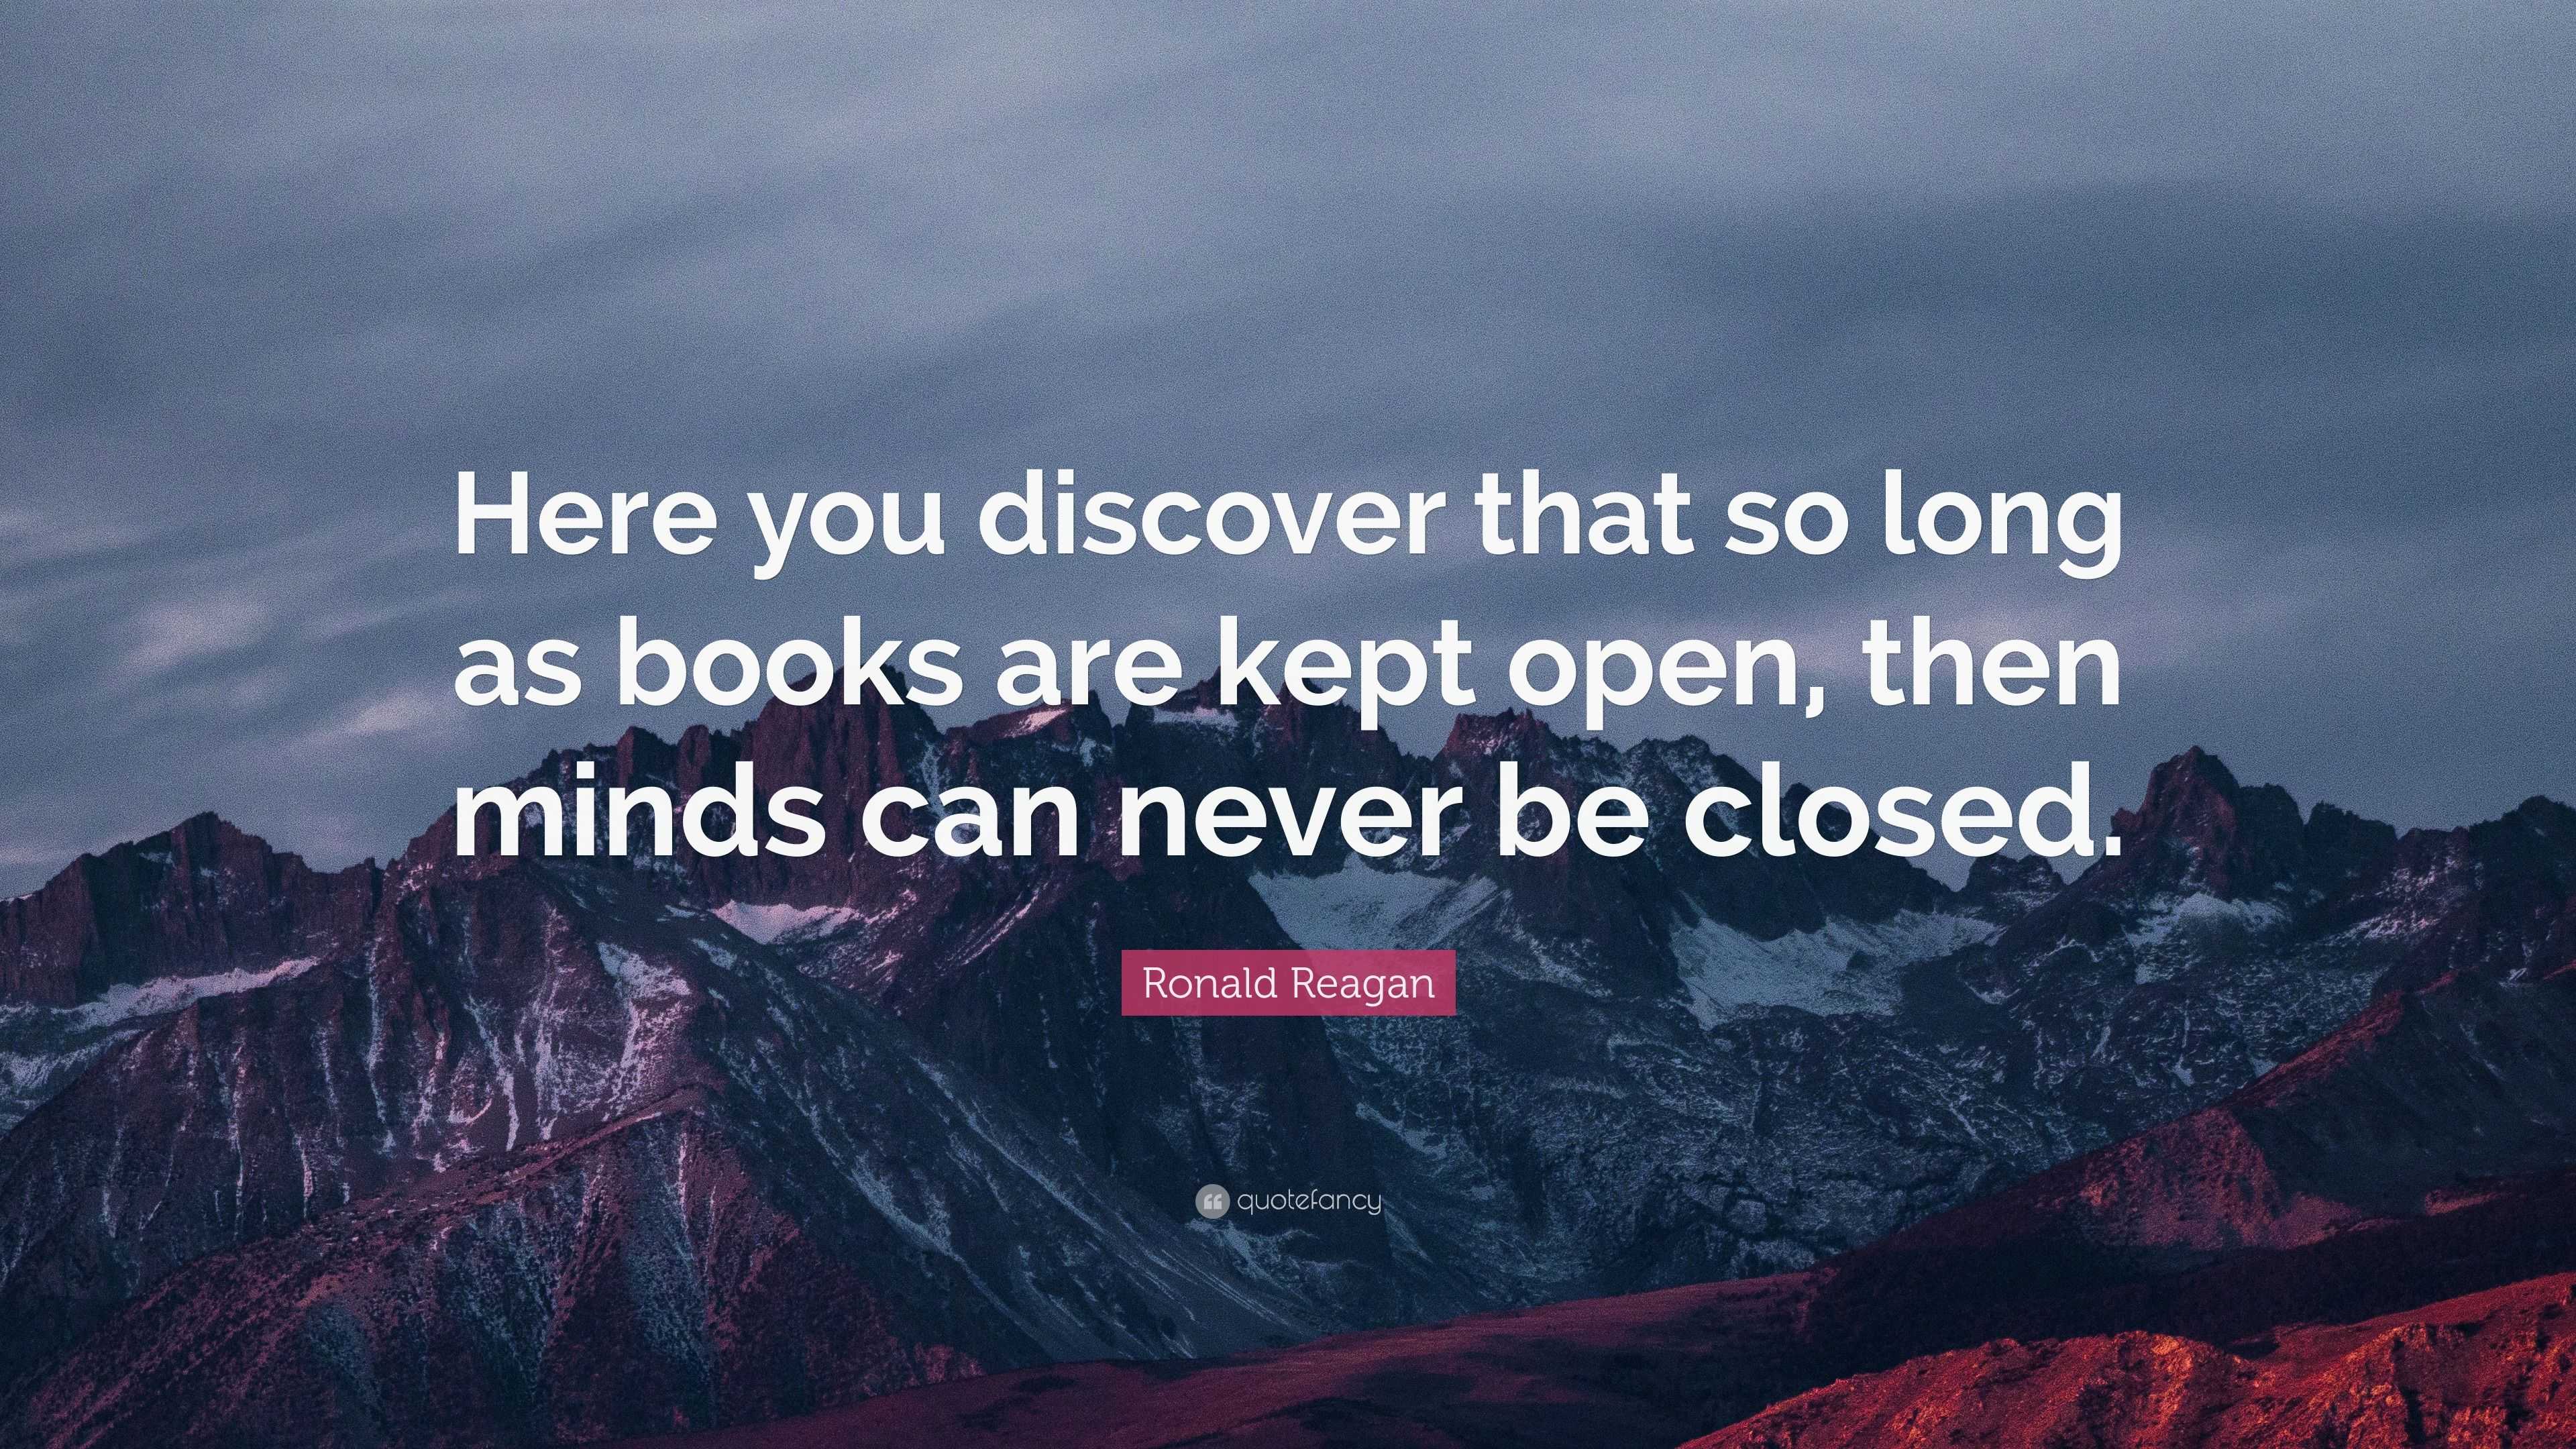 Ronald Reagan Quote: “Here you discover that so long as books are kept ...